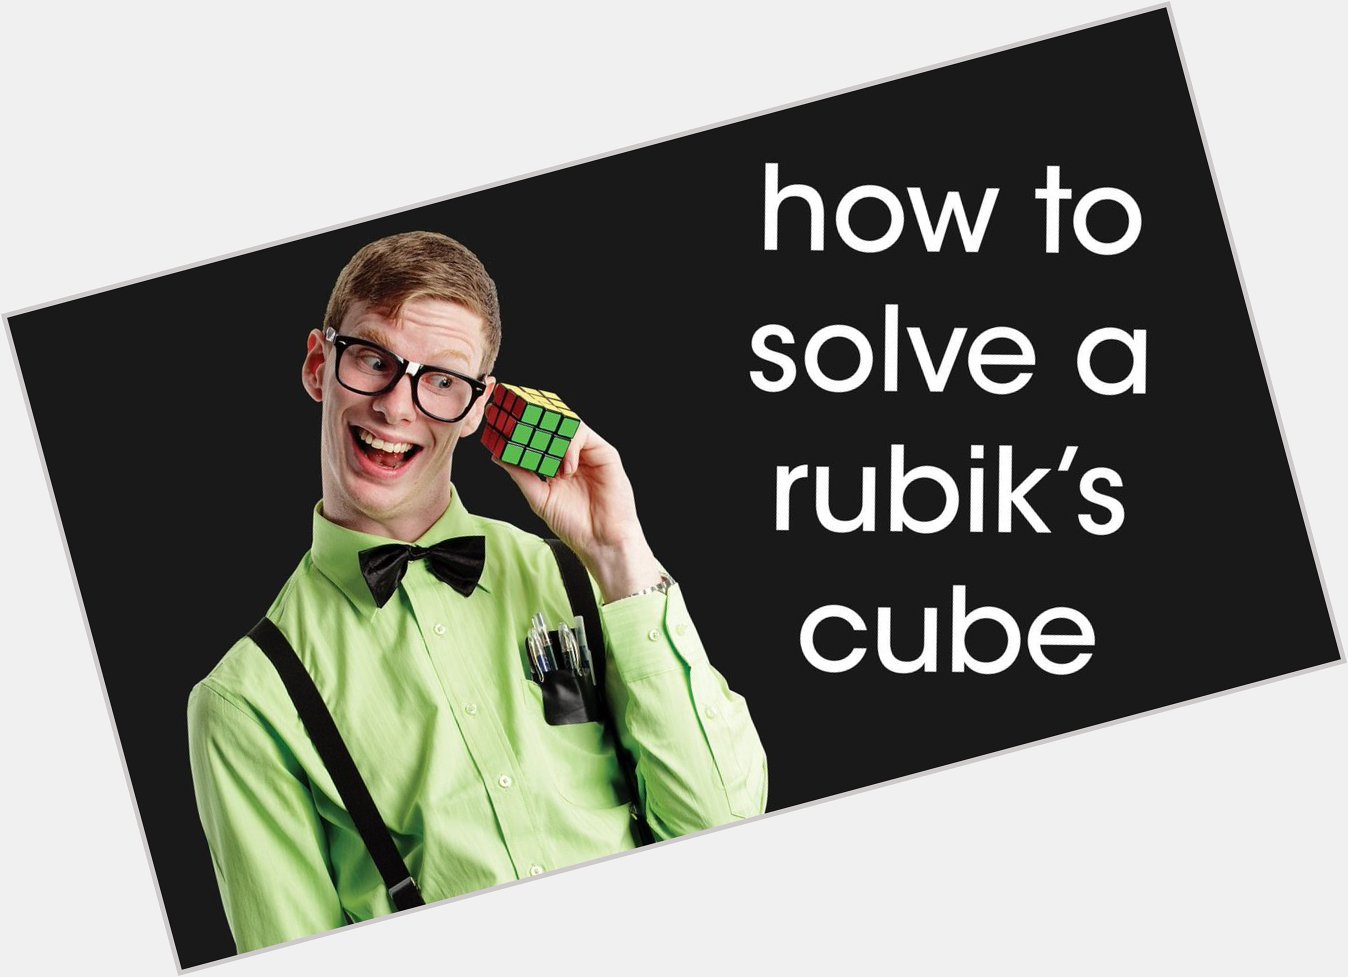 Happy Birthday, Erno Rubik. Your diabolical cube melted millions of brains and made nerds into superheroes. 